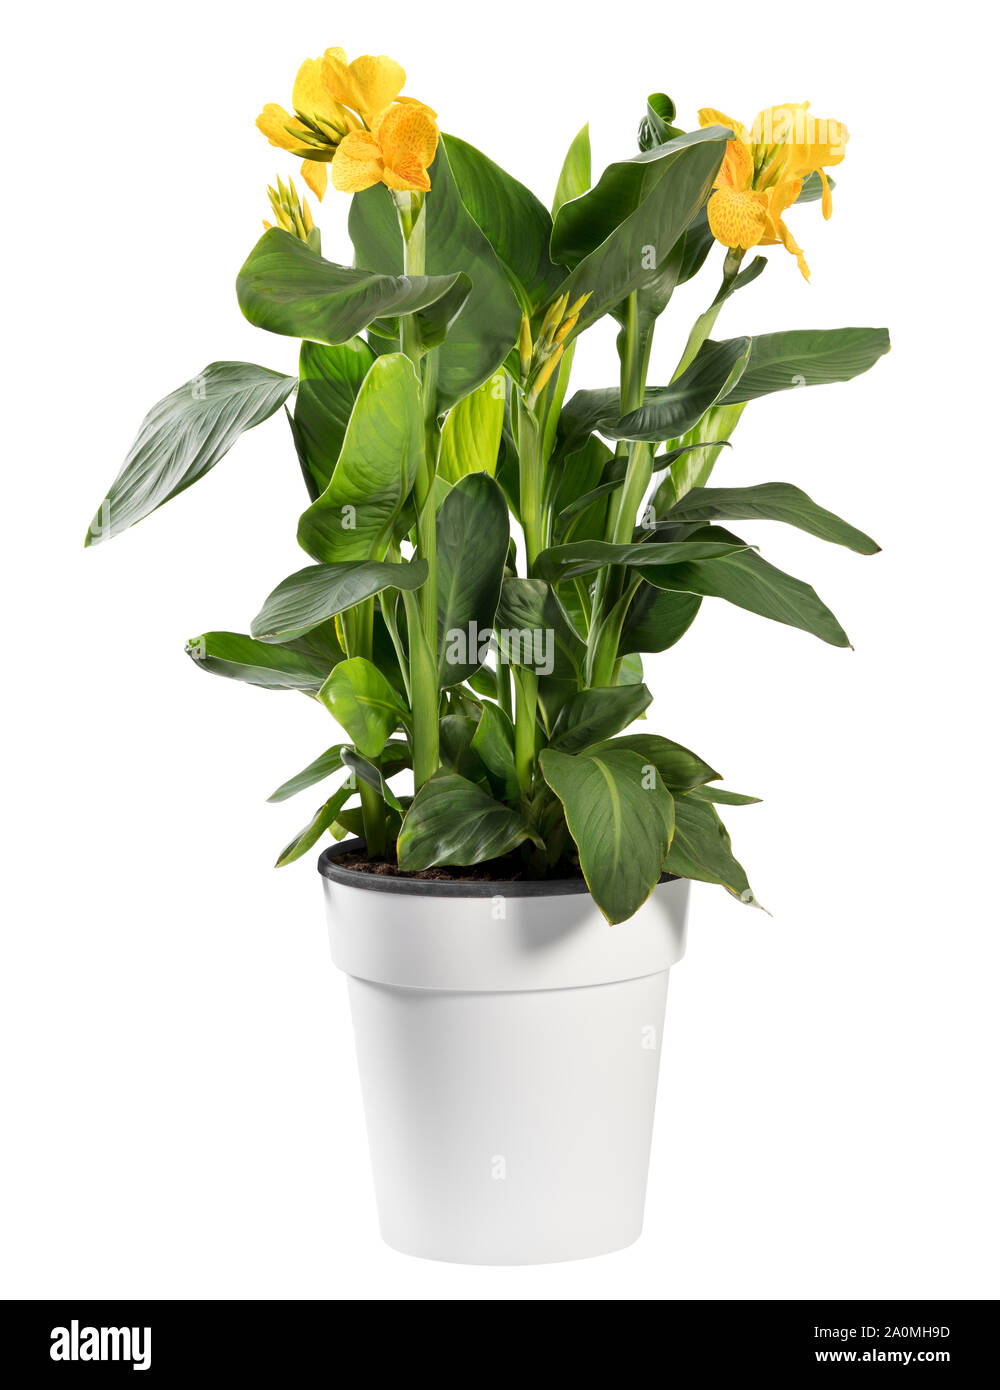 Leafy green Canna indica plant with yellow flowers, commonly known as African arrowroot, potted in a plain white flowerpot isolated on white Stock Photo